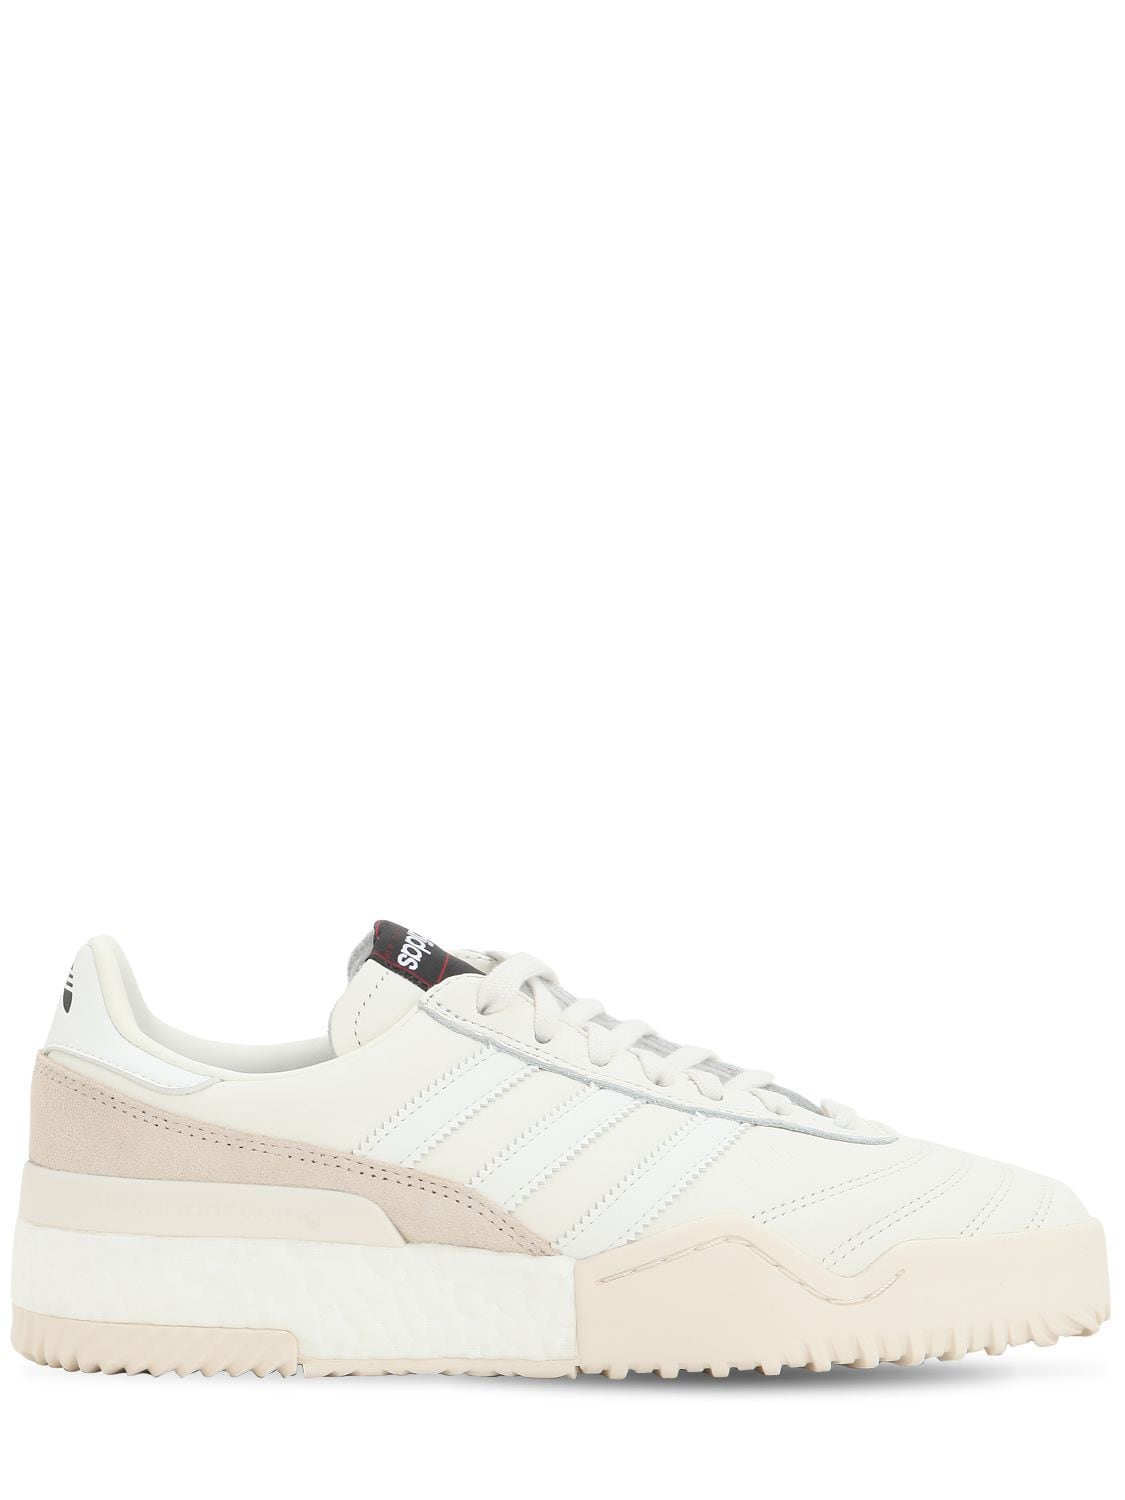 ADIDAS ORIGINALS BY ALEXANDER WANG AW SOCCER BBALL LEATHER trainers,69IRSE003-Q09SRSBXSELURQ2